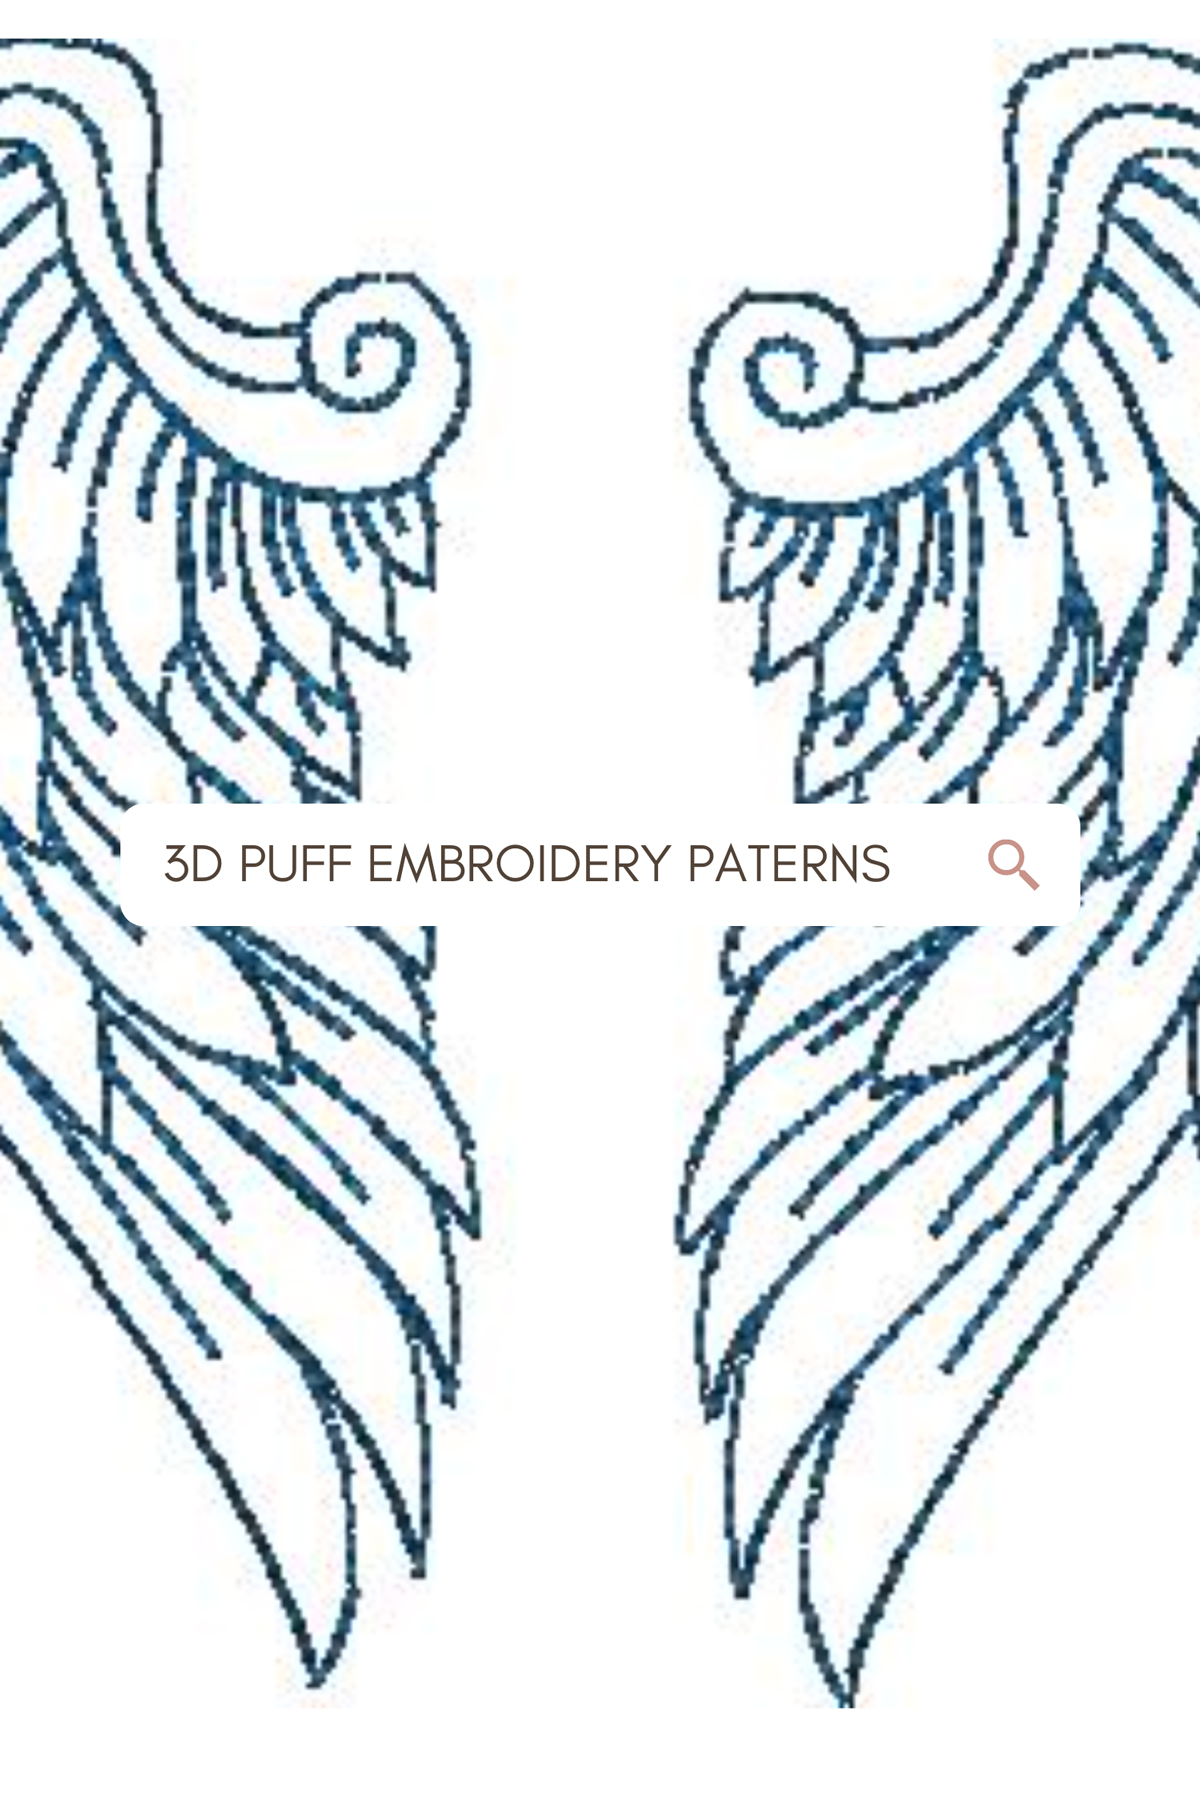 3D Puff embroidery patterns